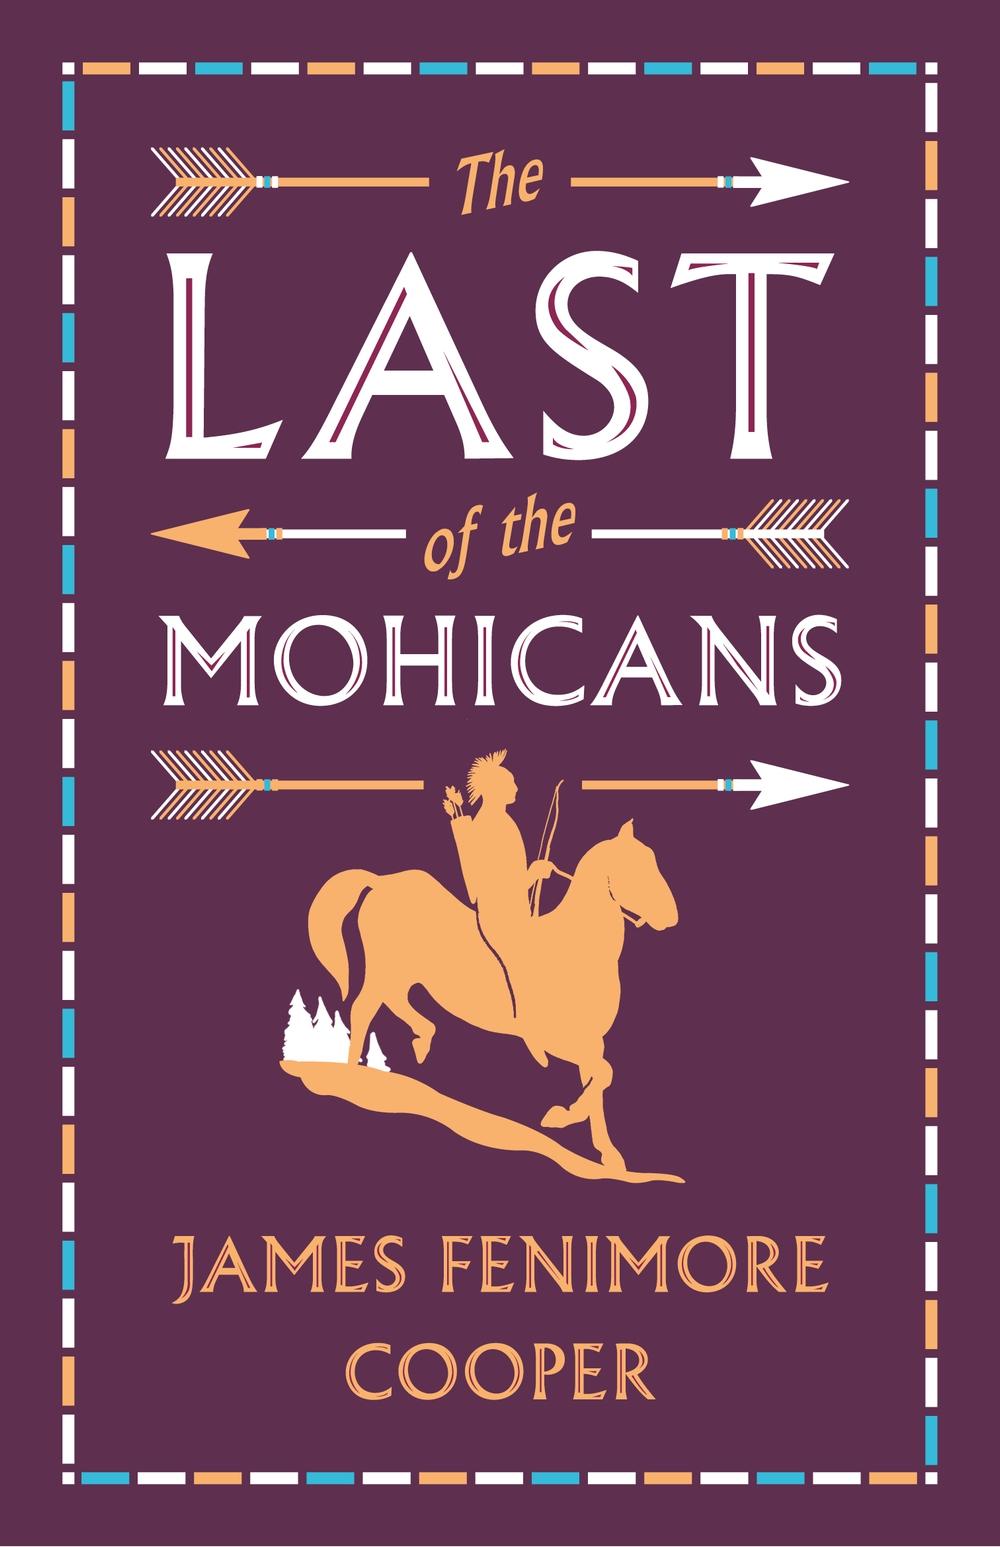 Last of the Mohicans - James Fenimore Cooper